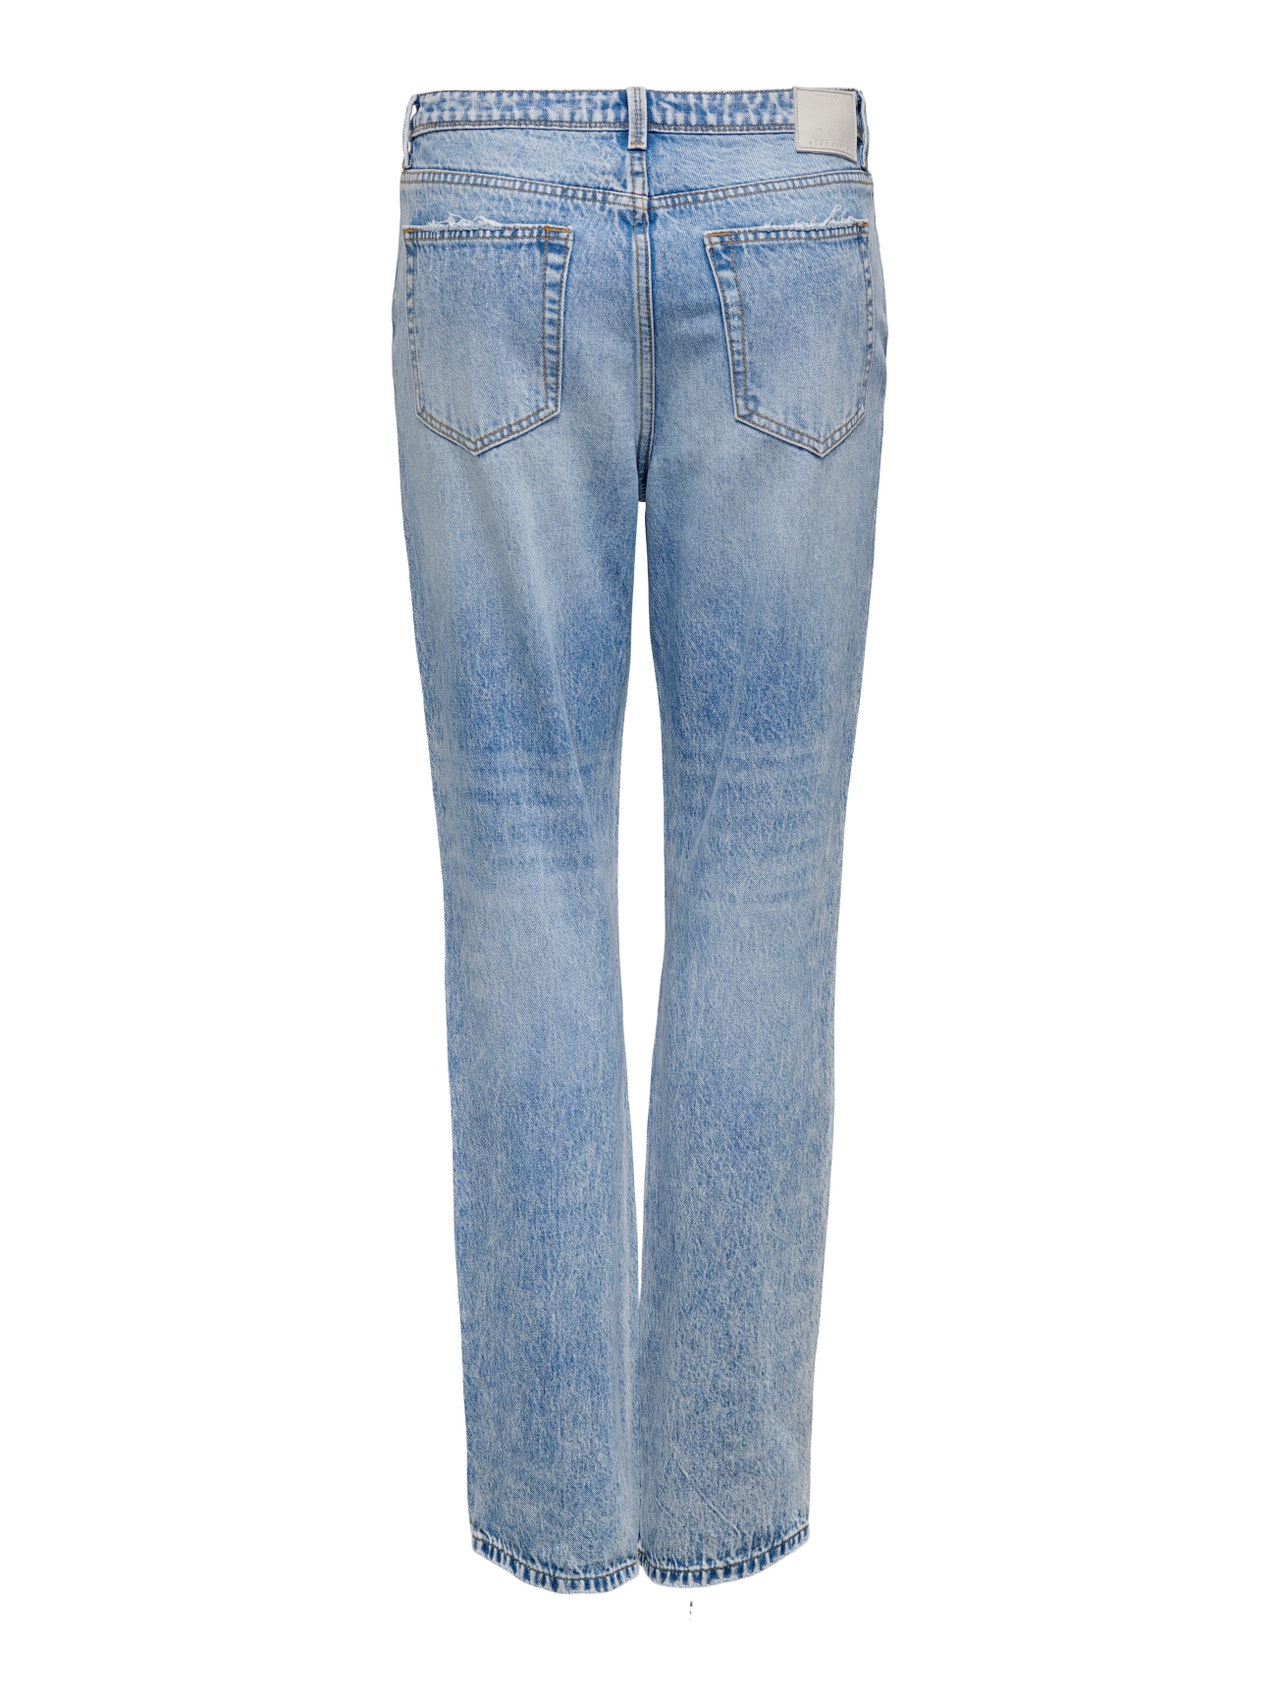 ONLY Jeans Straight Fit Taille moyenne -Light Blue Denim - 15297087